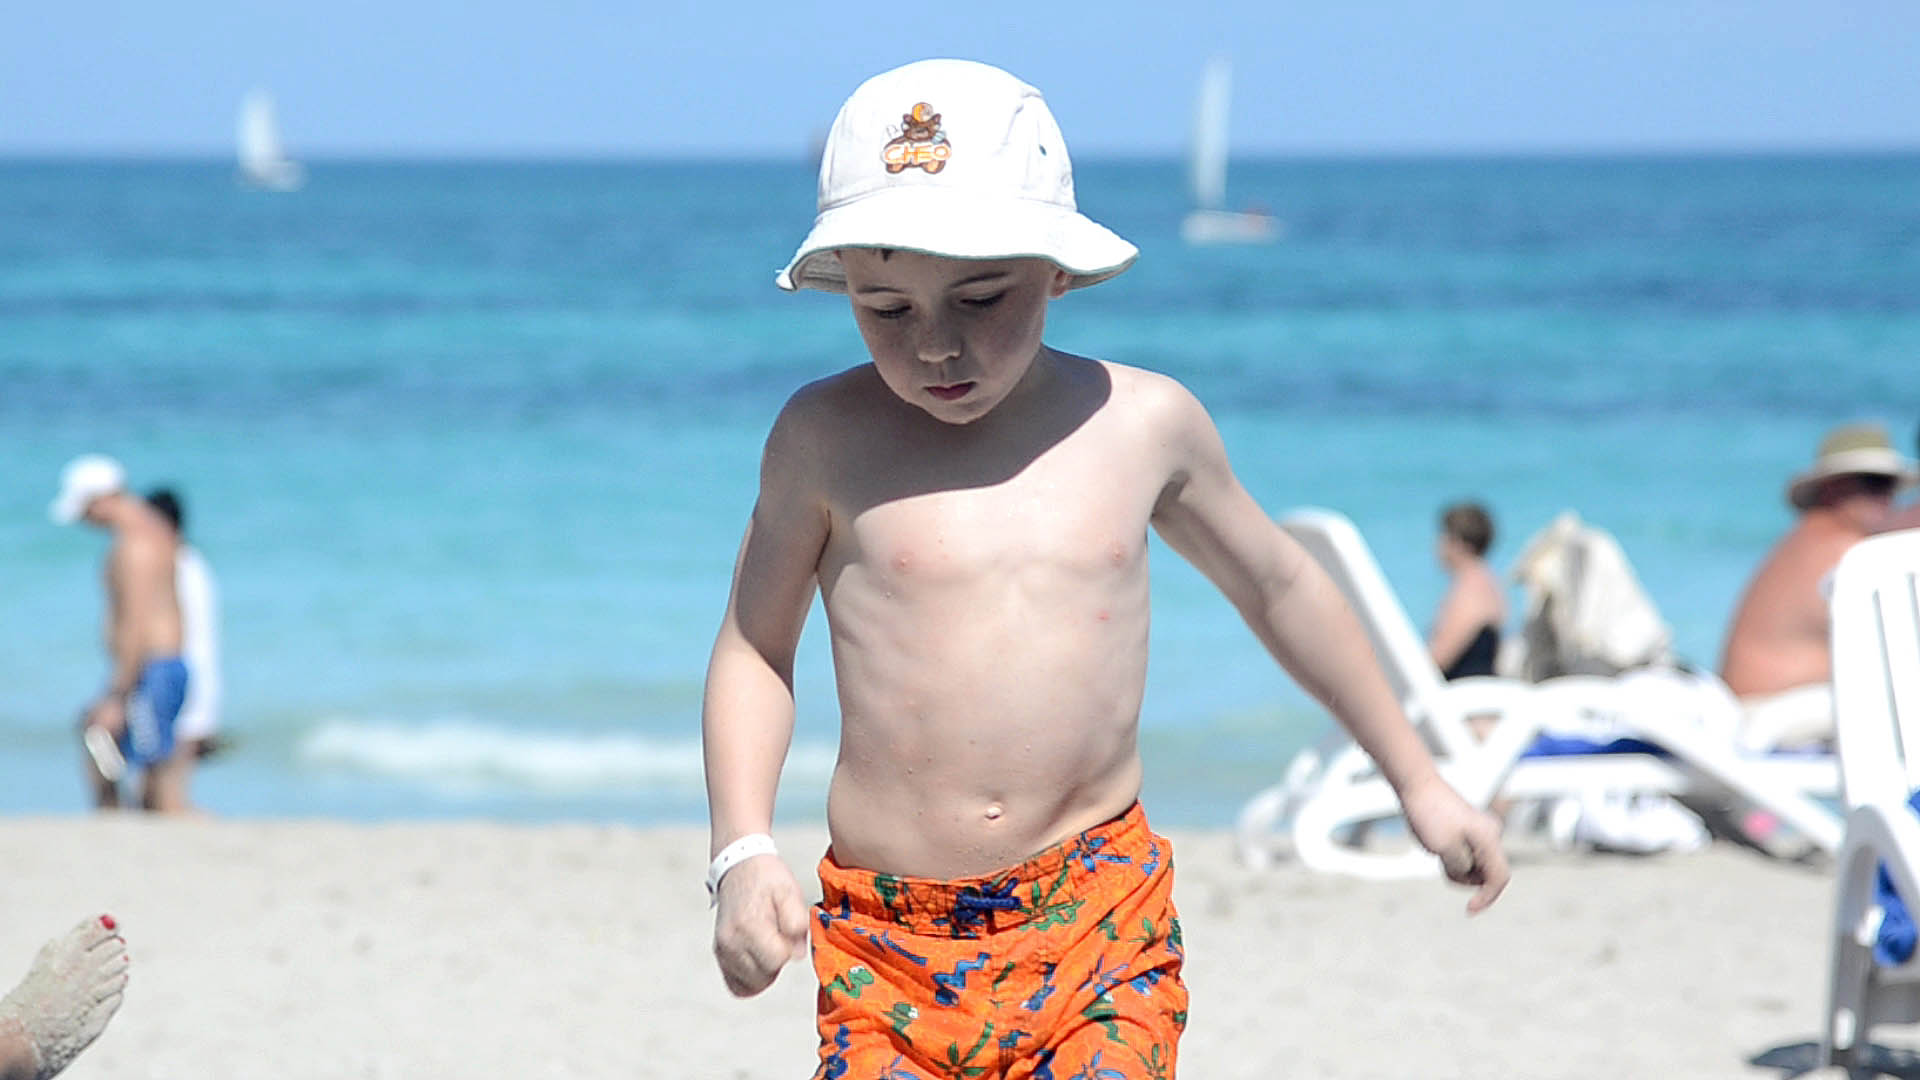 A medium shot of a 7 year old beach boy with bucket hat, running up the beach toward the camera with the beach and the ocean in the background at the Iberostar Laguna Azul Beach Resort in Varadero Cuba